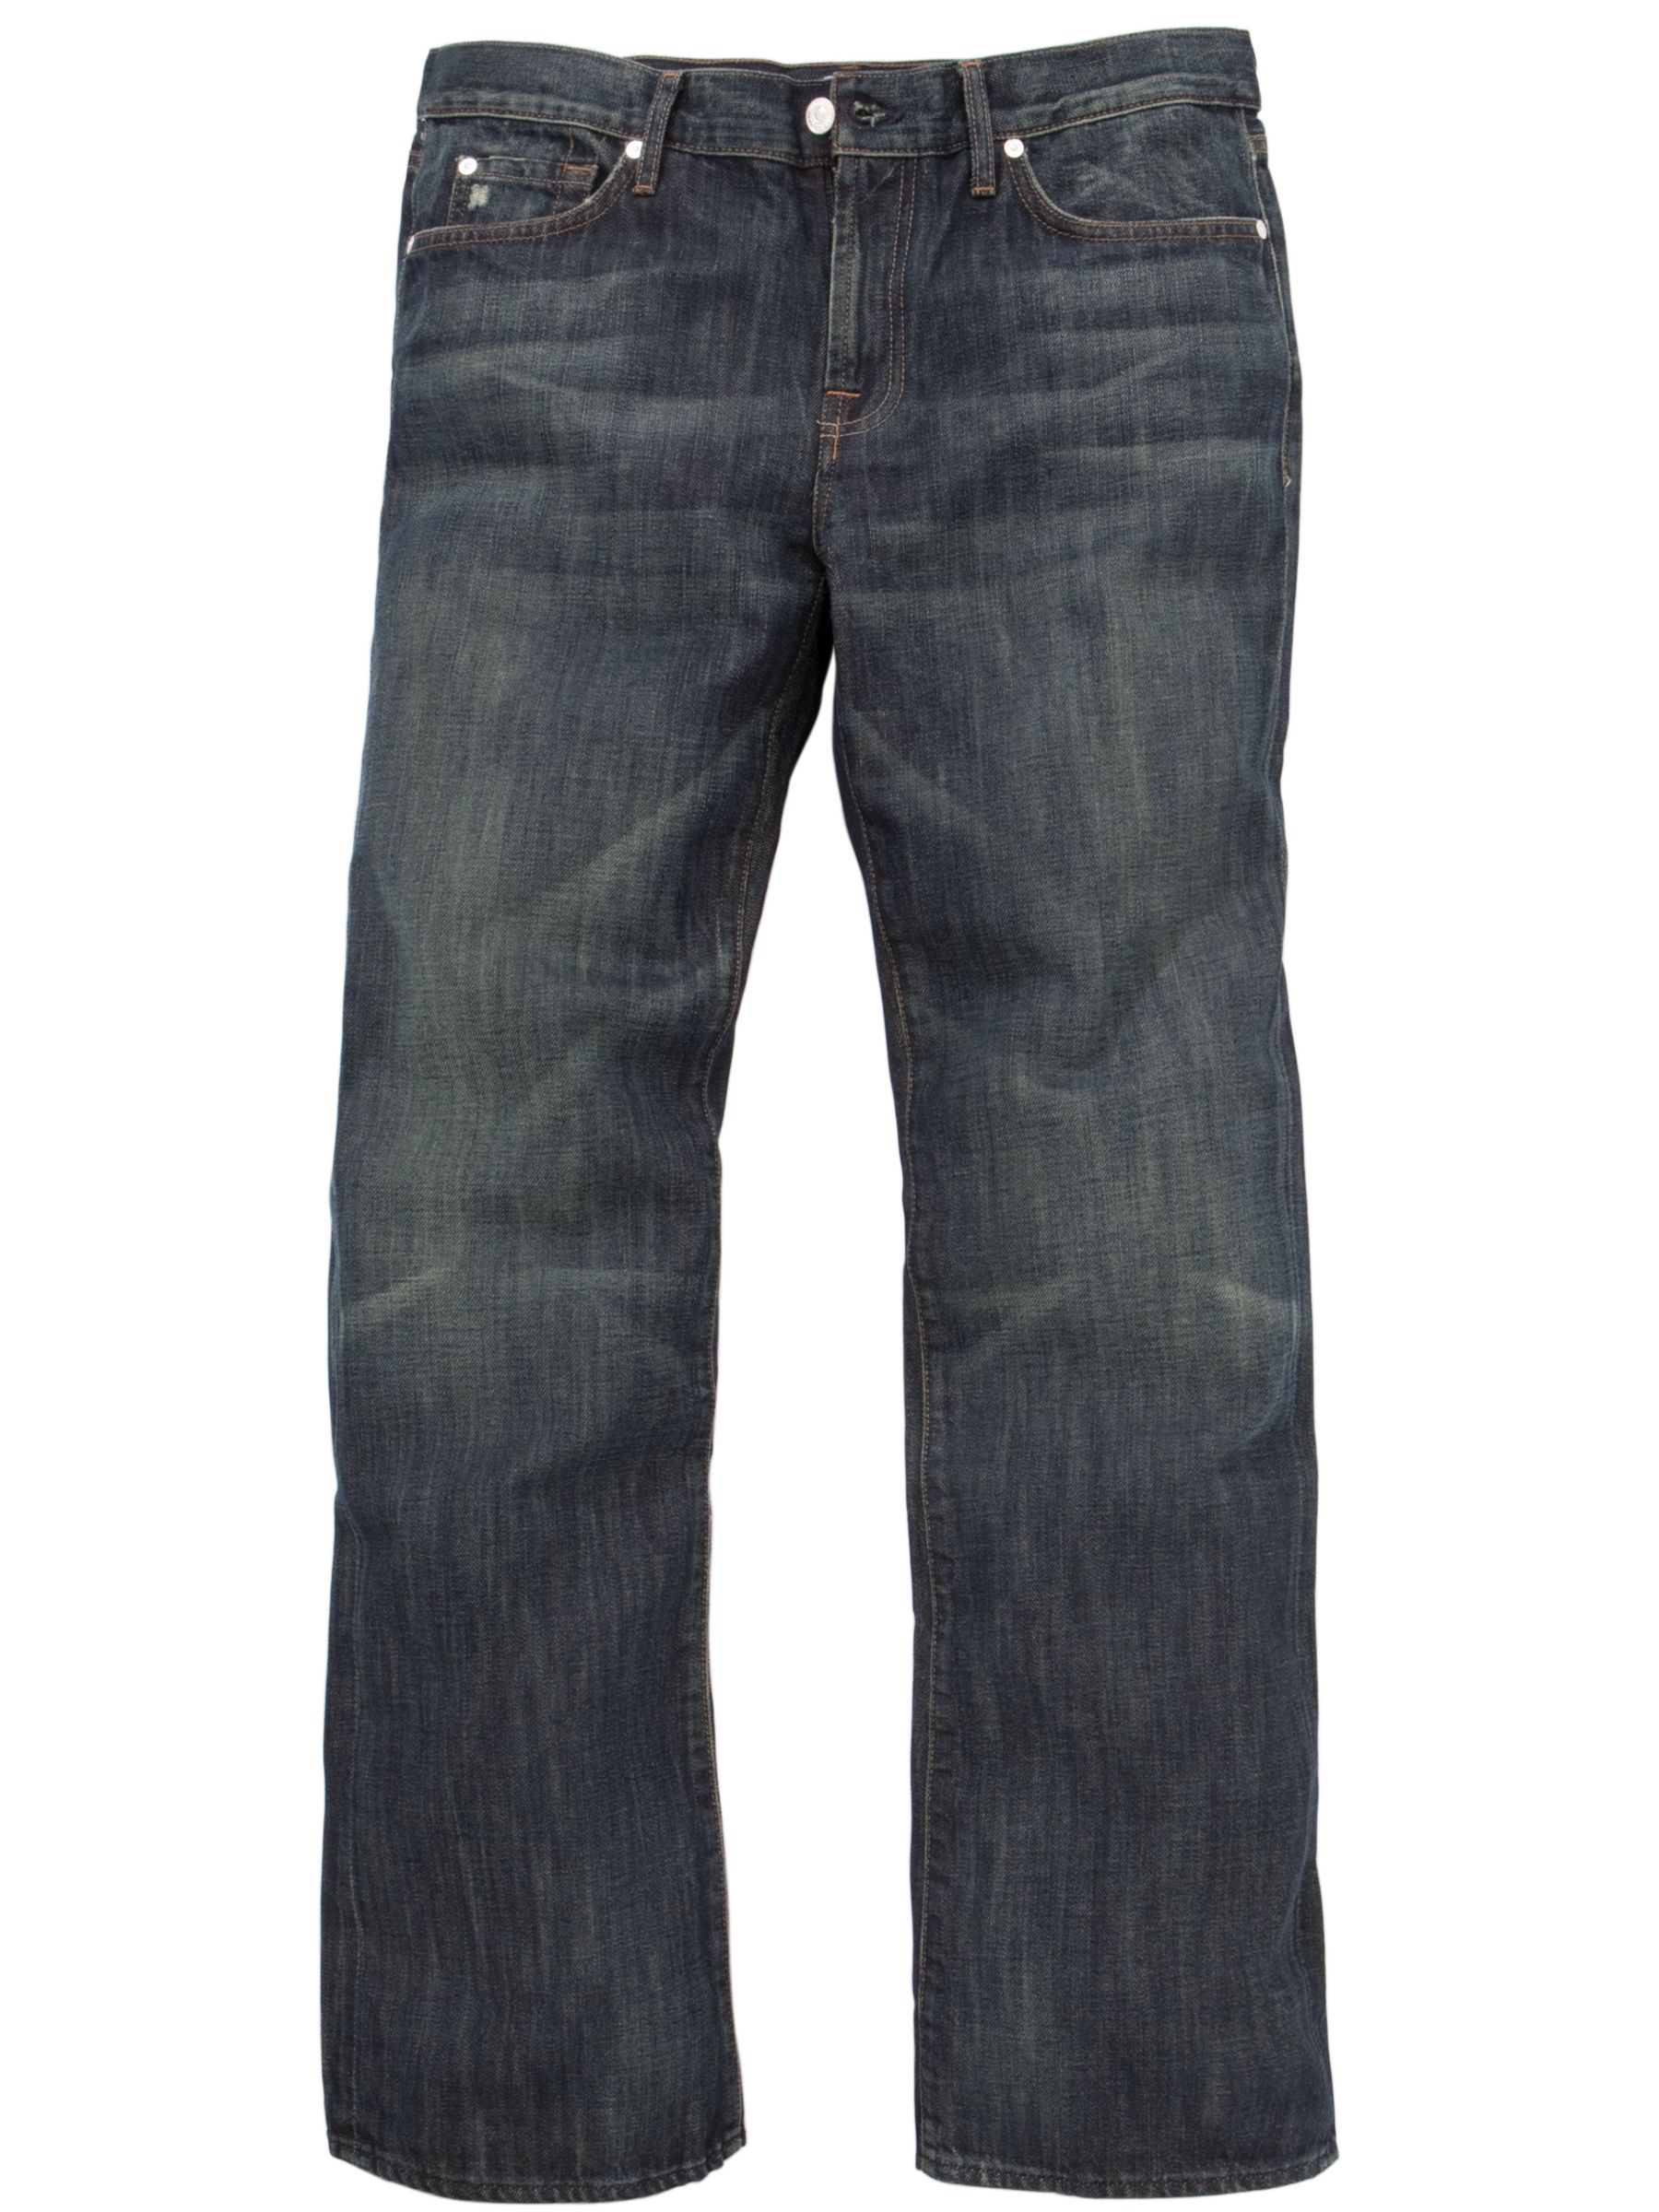 7 For All Mankind Montana Bootcut Jeans, Blue at JohnLewis